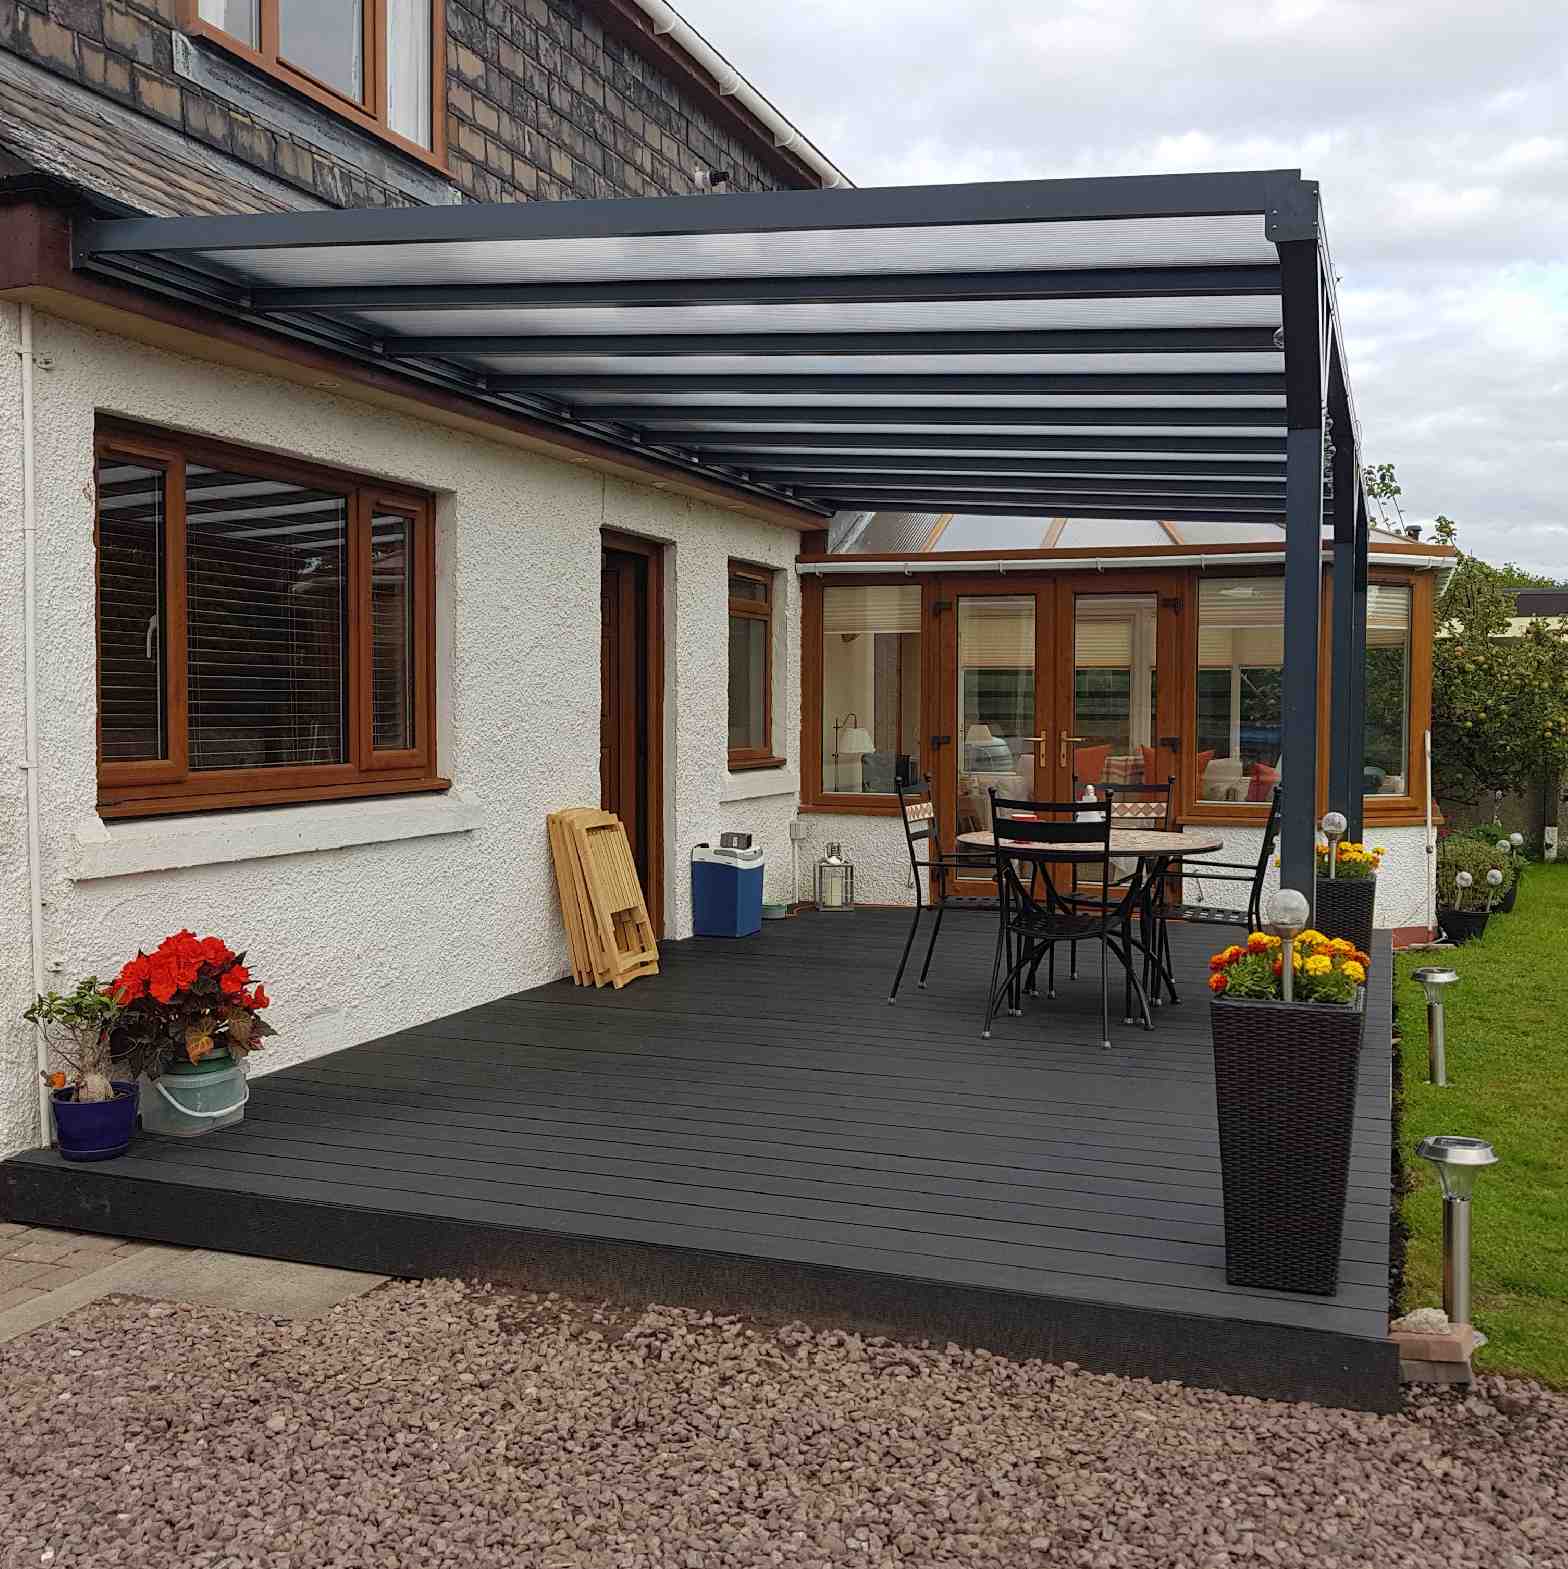 Buy Omega Verandah, Anthracite Grey, 6mm Glass Clear Plate Polycarbonate Glazing - 10.0m (W) x 4.0m (P), (5) Supporting Posts online today